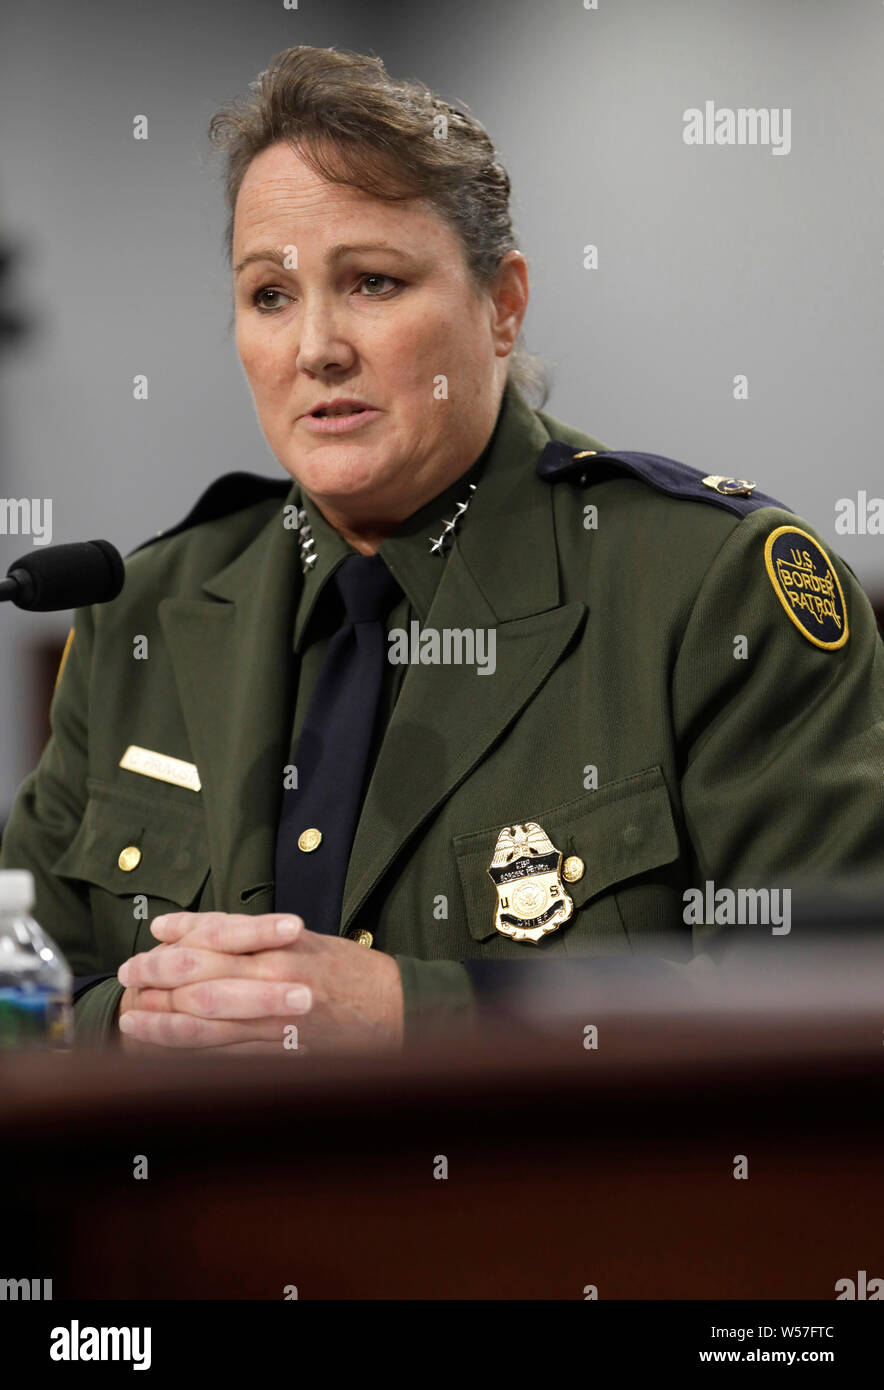 Chief of the U.S. Border Patrol Carla Provost testifies before the House Committee on Appropriations during a Border Patrol Oversight hearing on Capitol Hill July 24, 2019 in Washington, D.C. Stock Photo